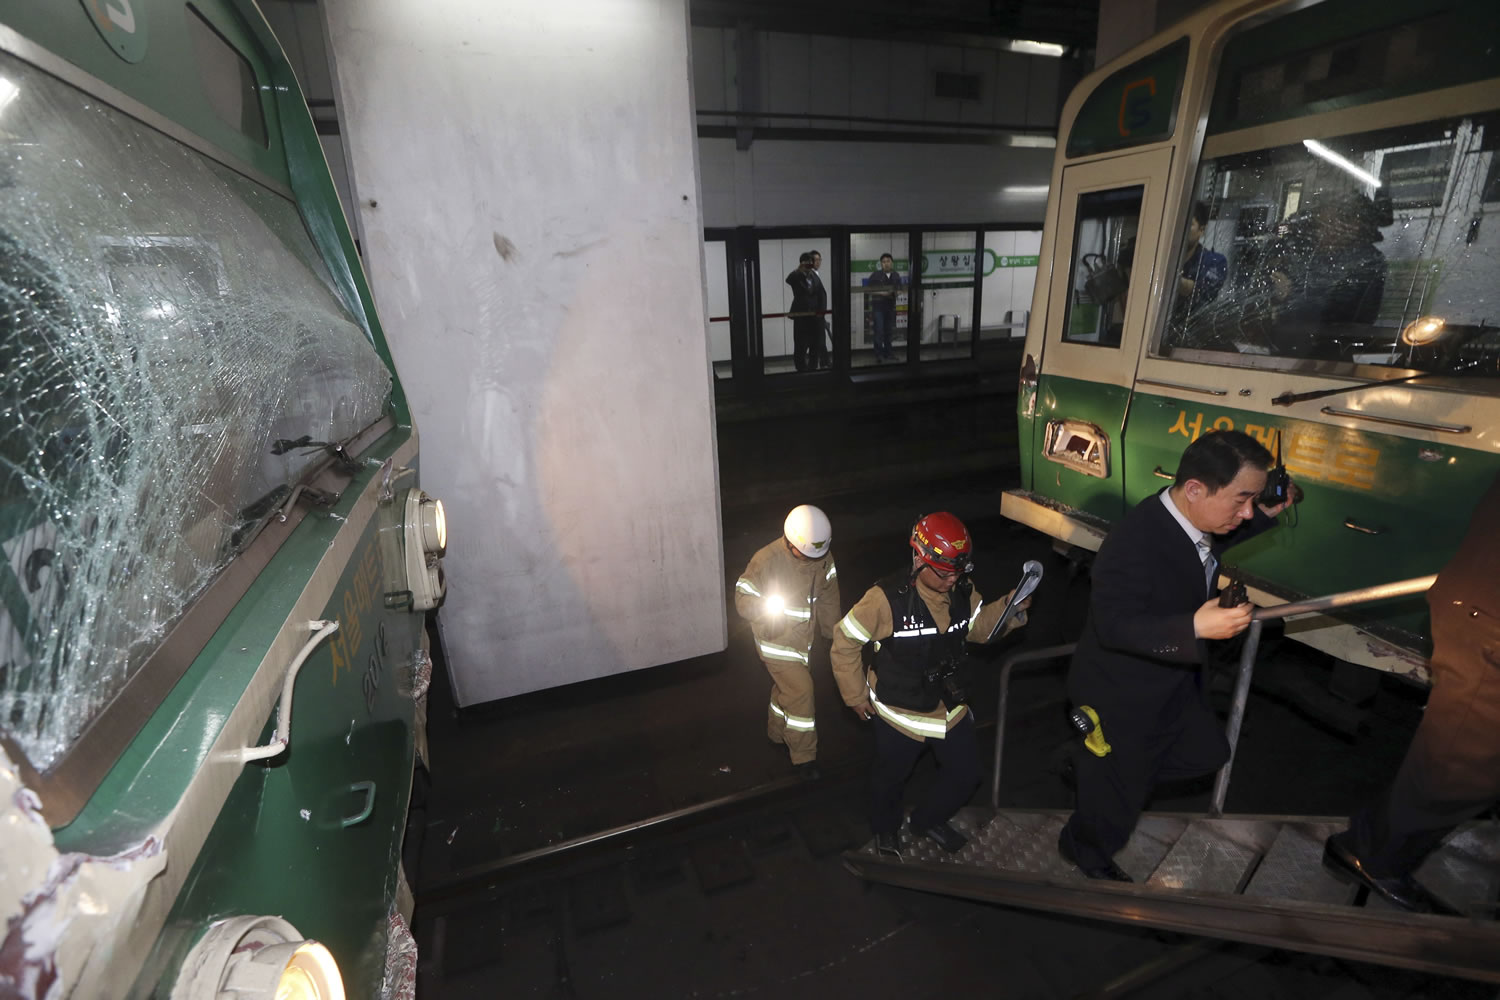 Windows of two subway trains remain broken after their collision at Sangwangshipri subway station in Seoul, South Korea, on Friday.